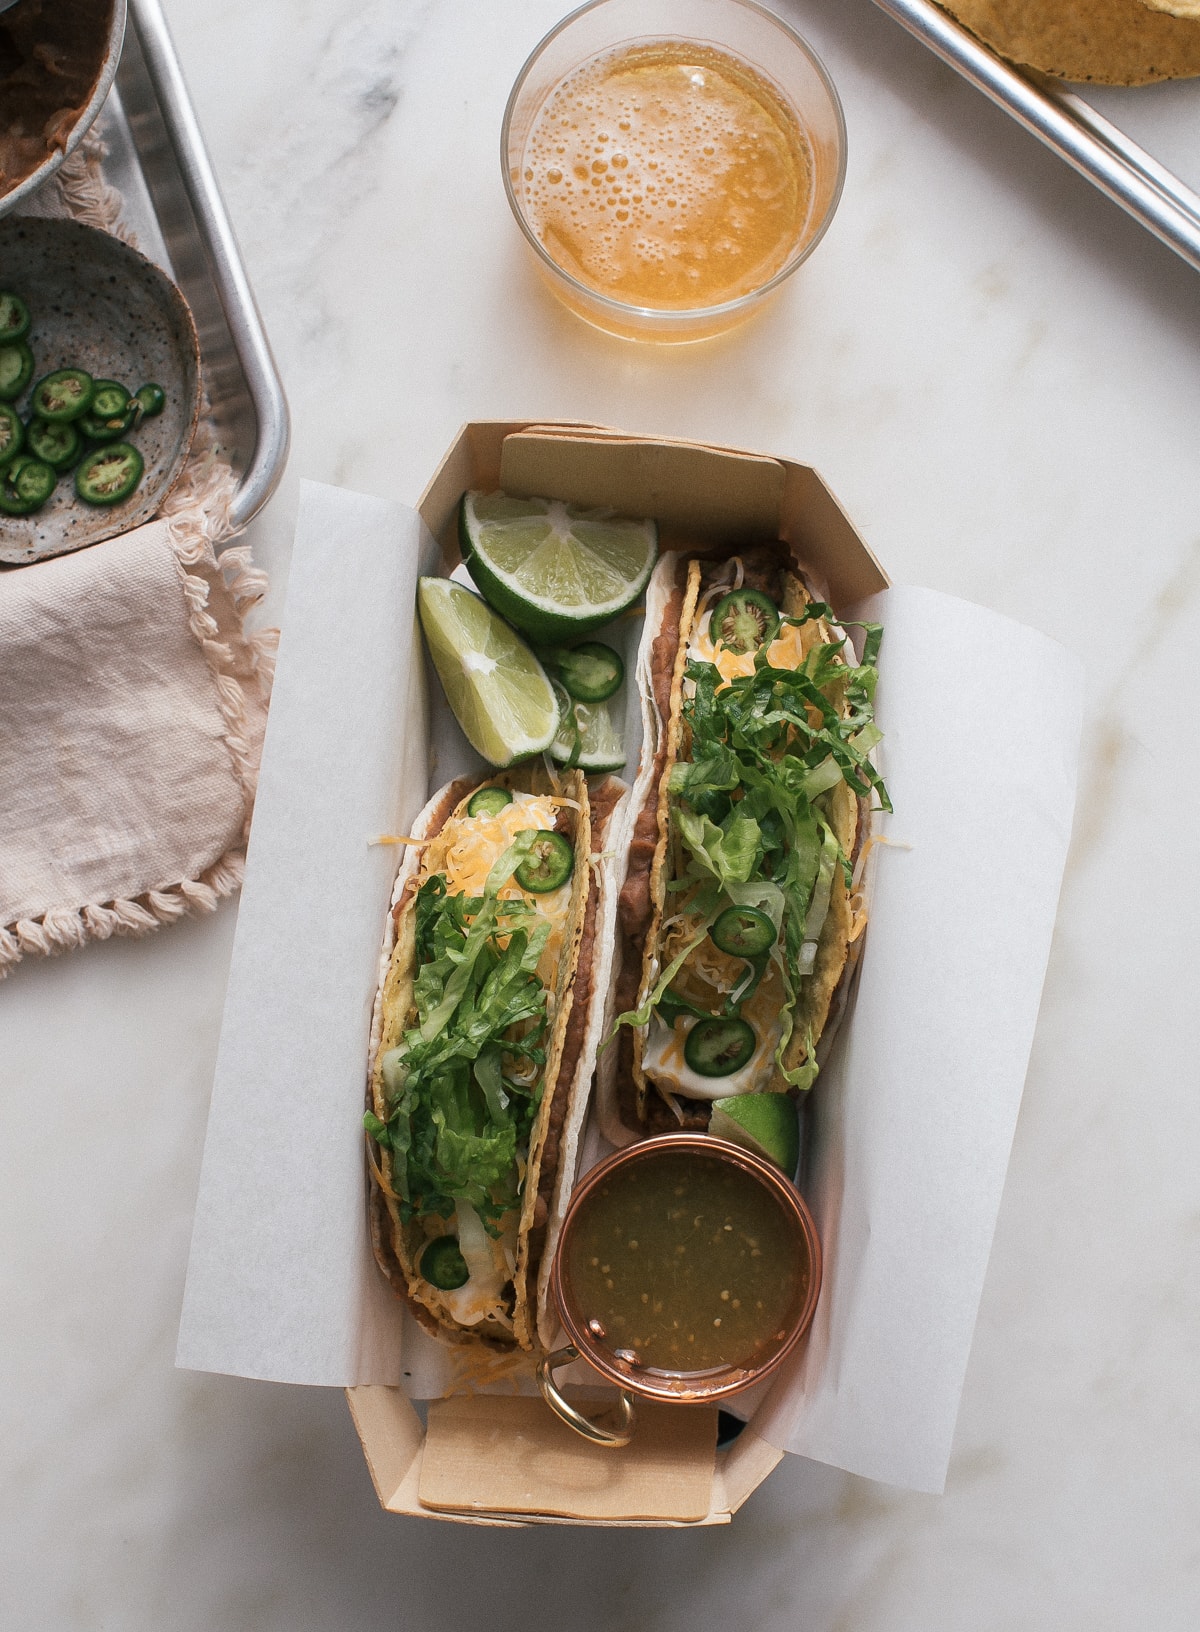 Overhead image of double decker tacos in a box with a drink nearby.